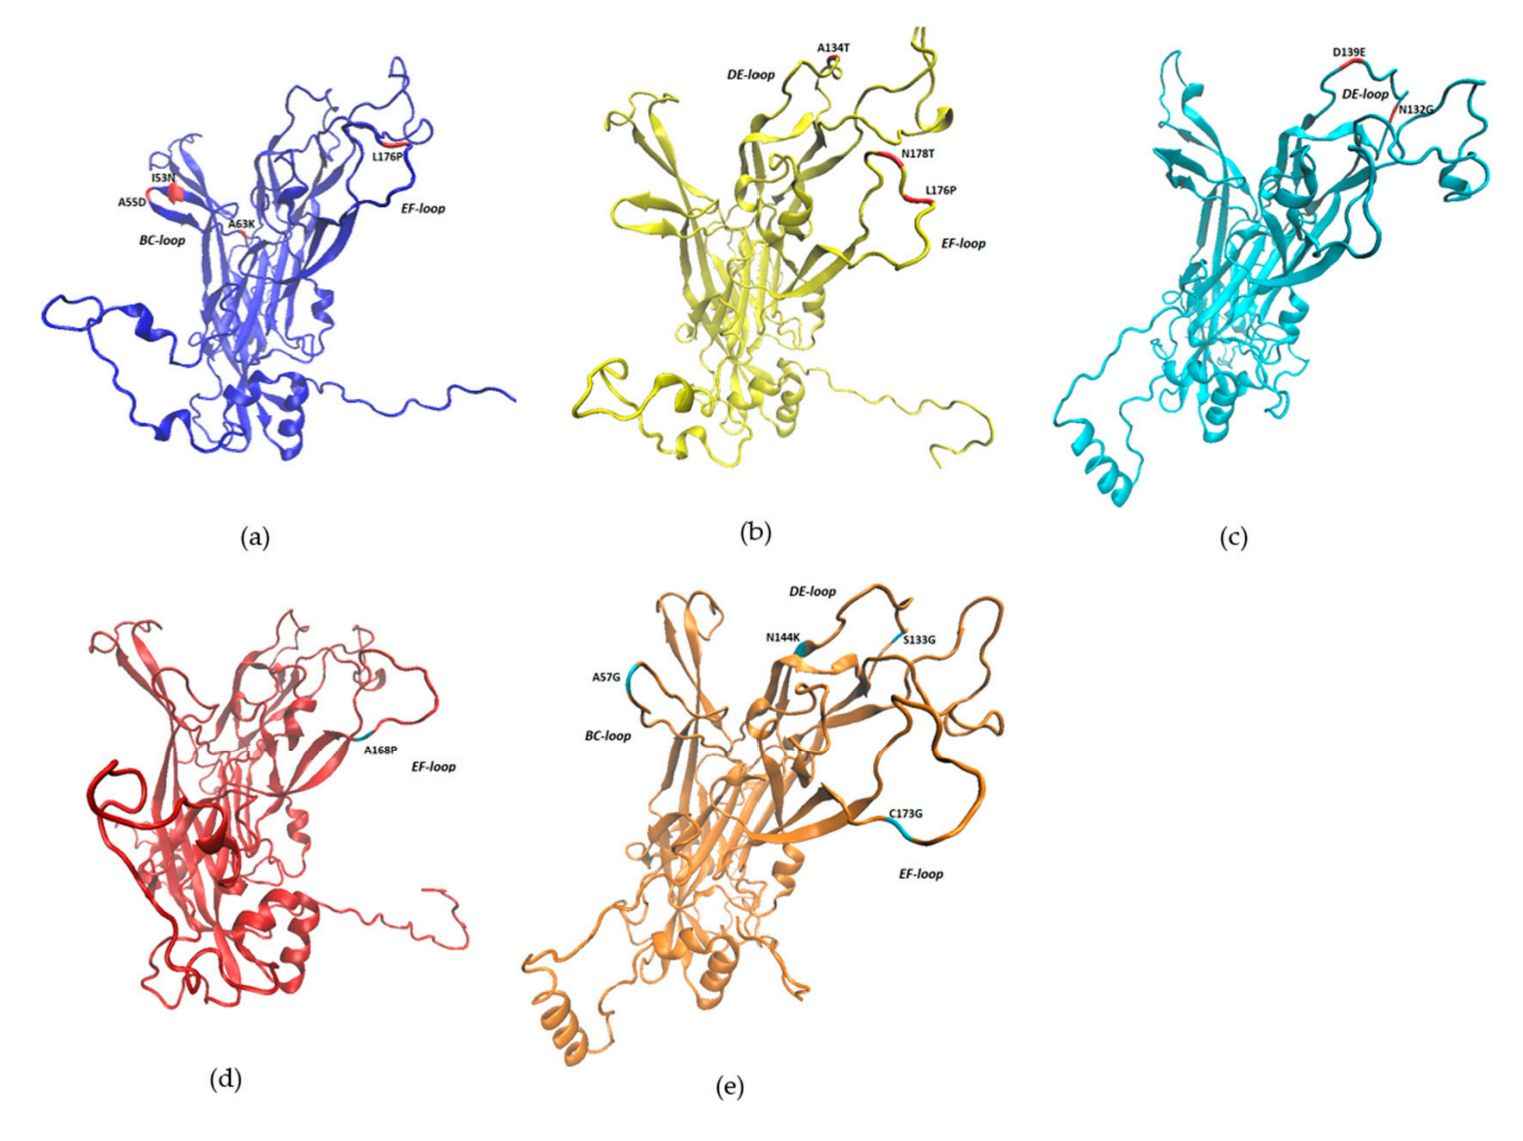 The 3D structures of BPV L1 protein.